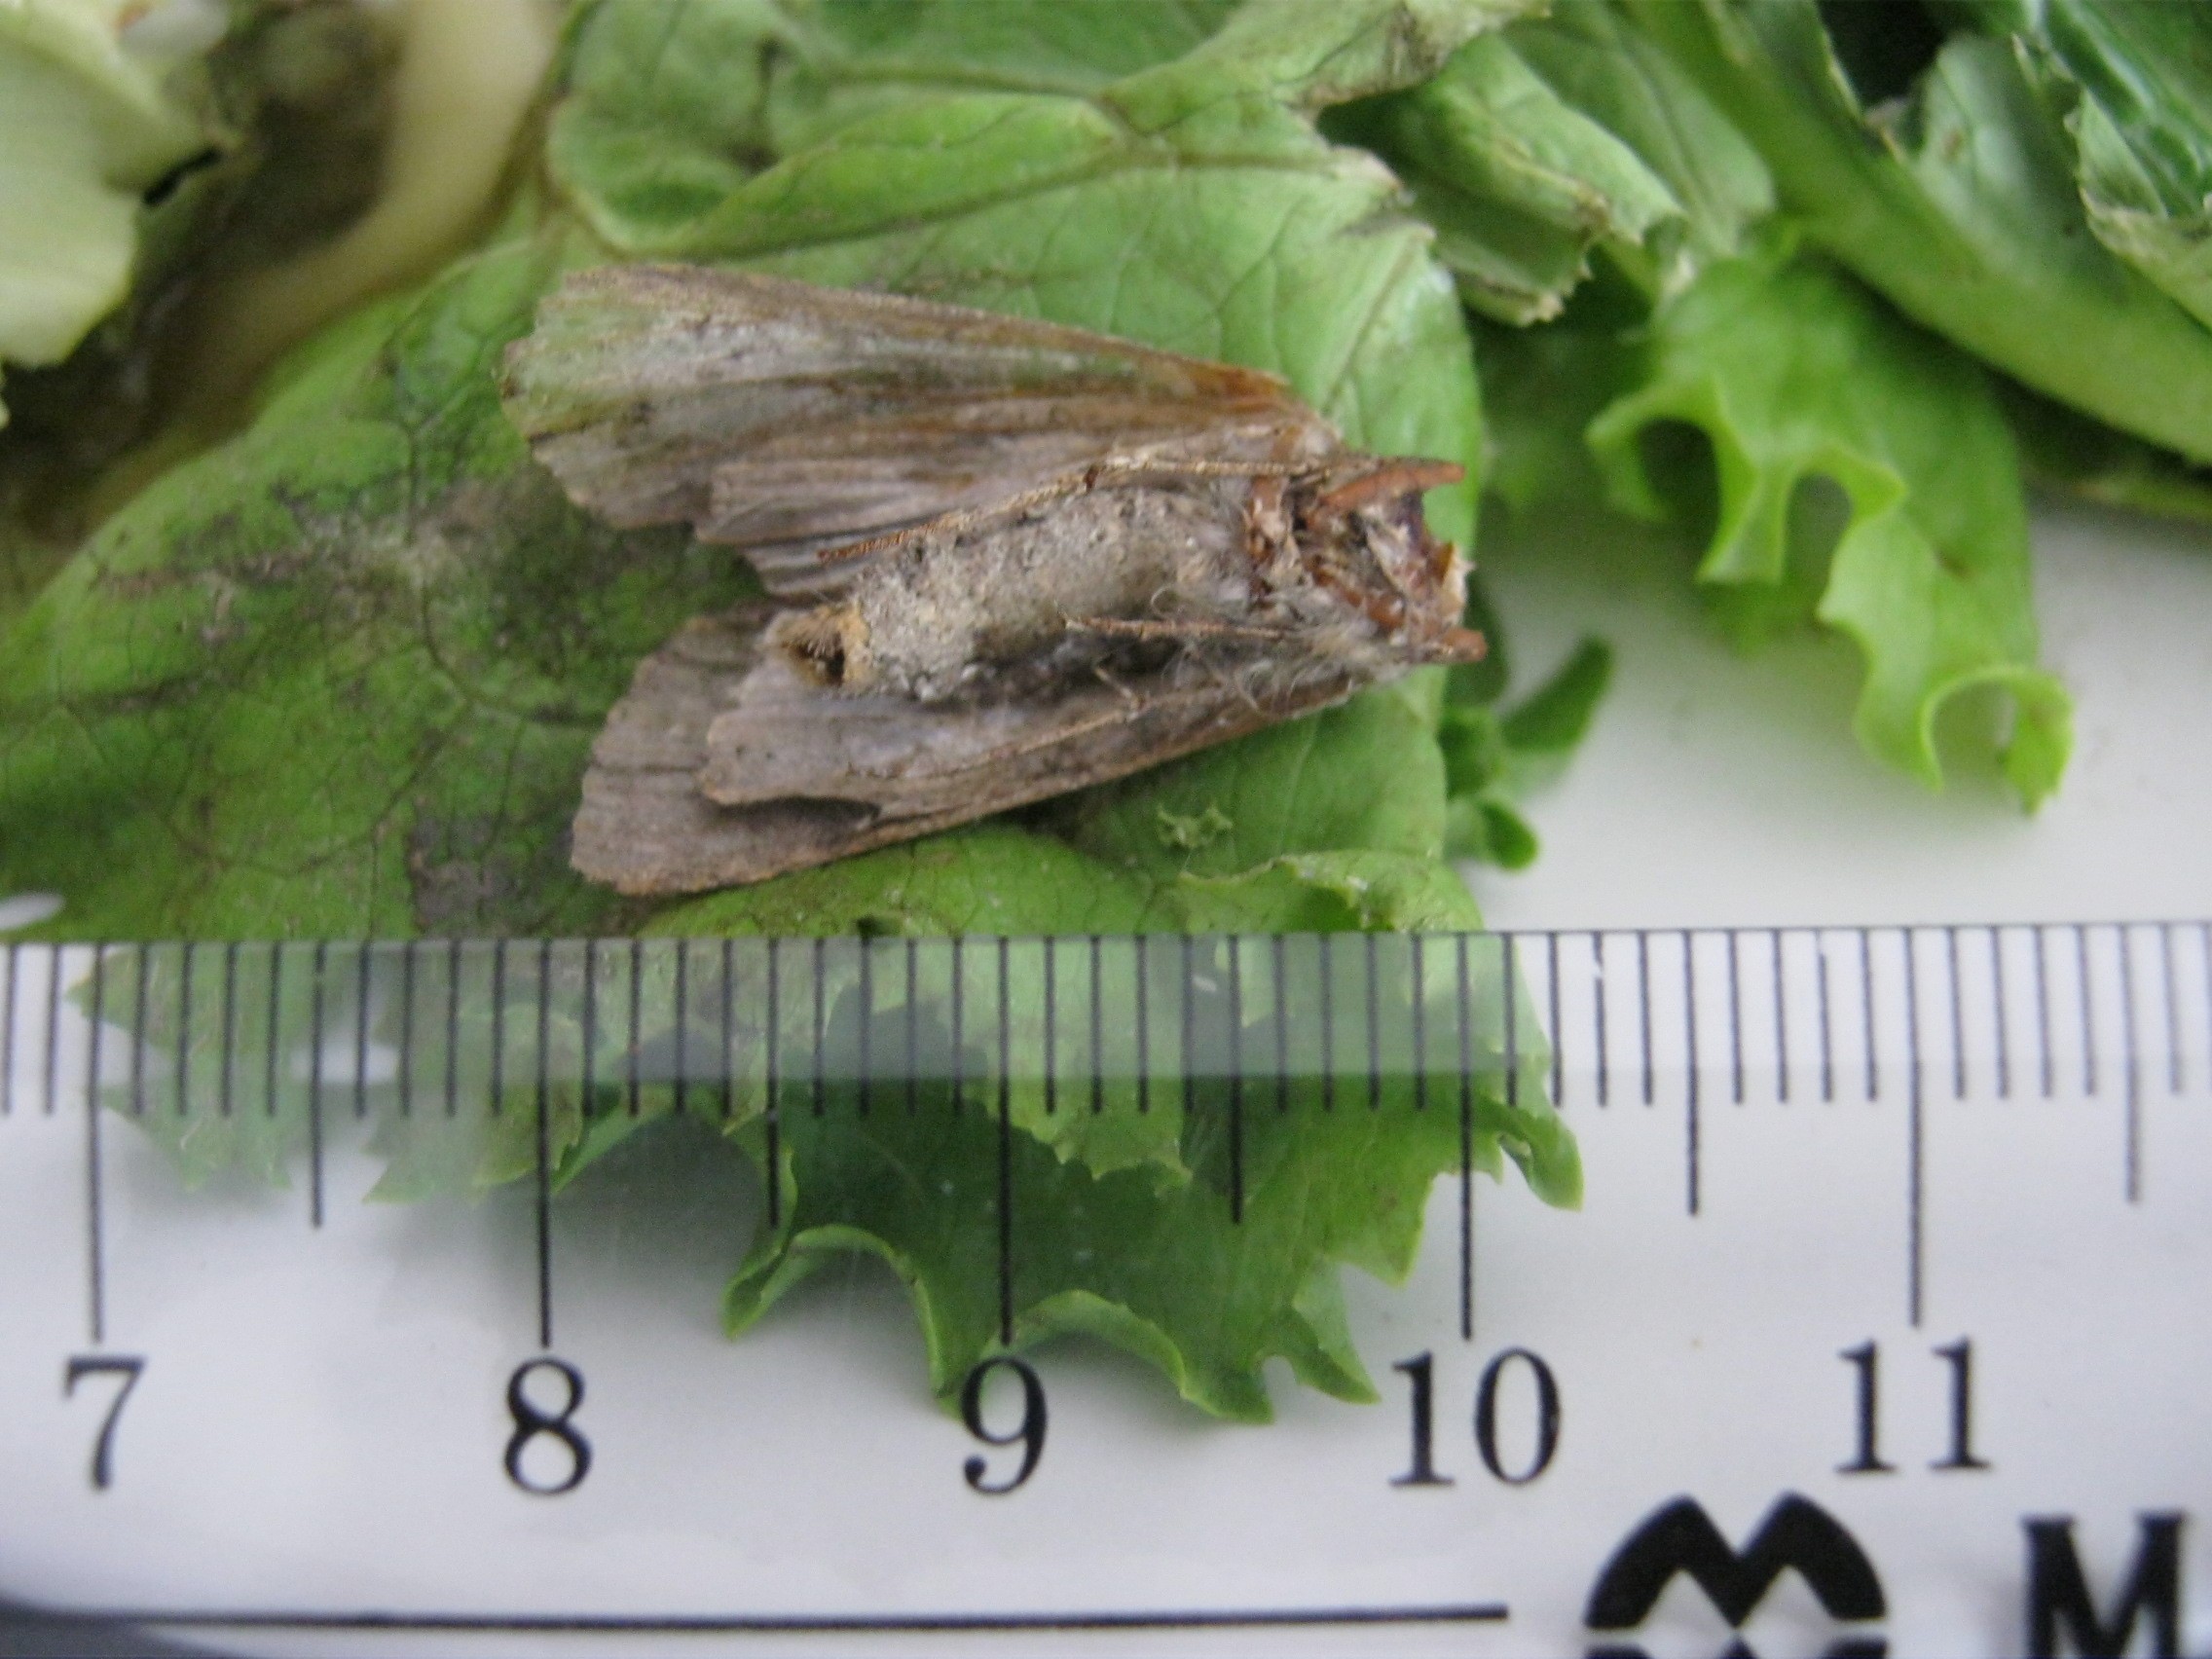 Dead moth found in ReadyPac salad